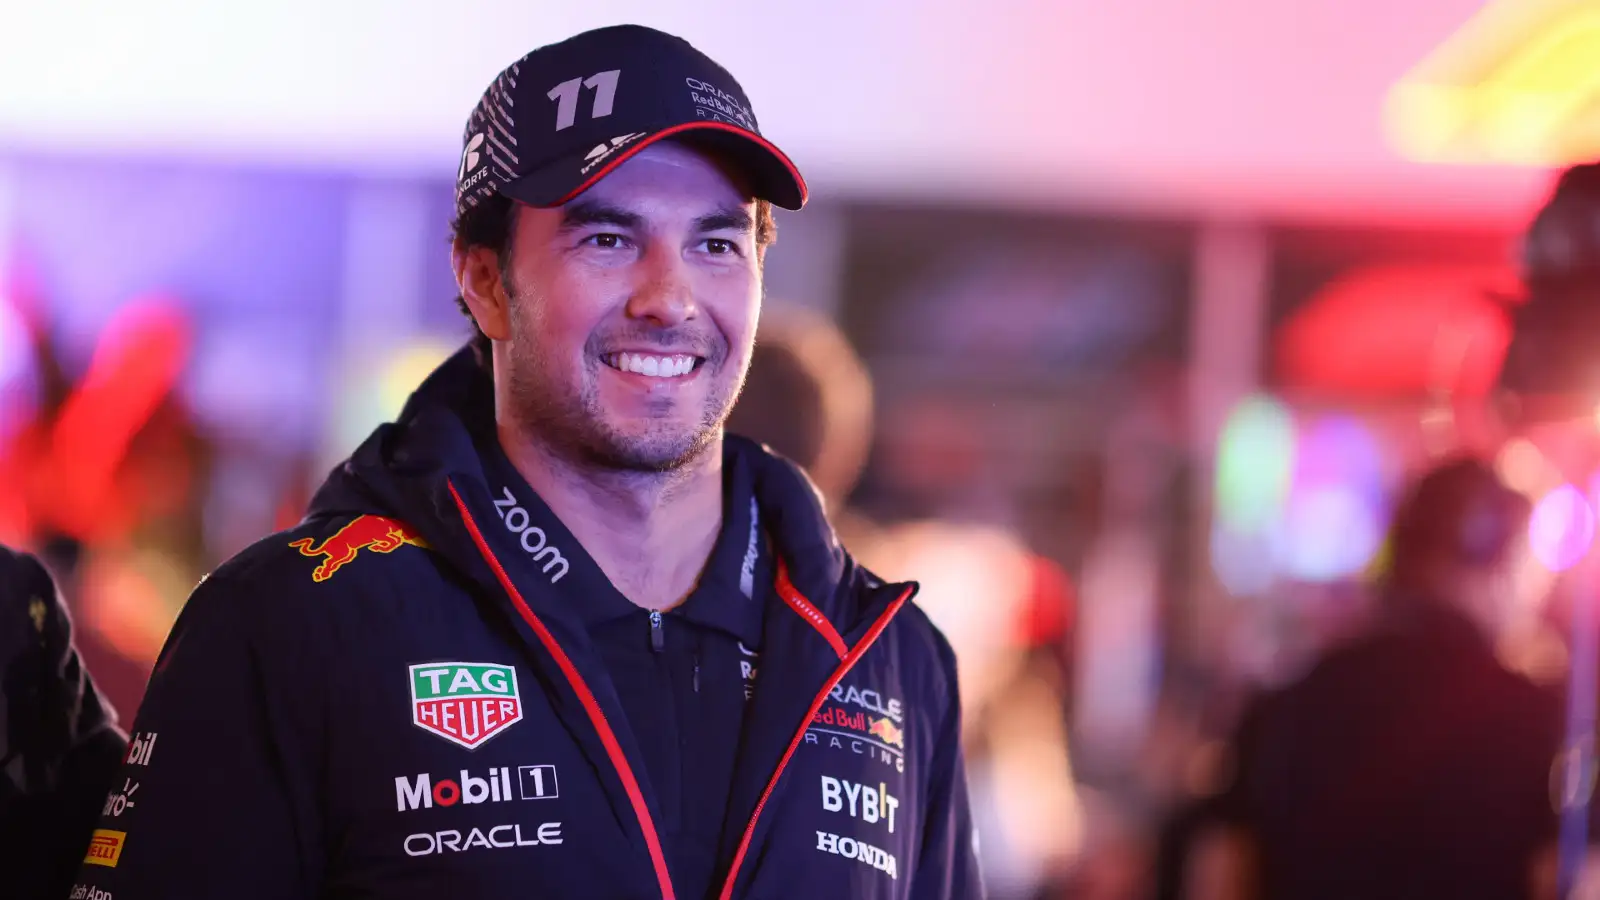 Sergio Perez walks through the paddock as the Red Bull driver competes in the Las Vegas Grand Prix.